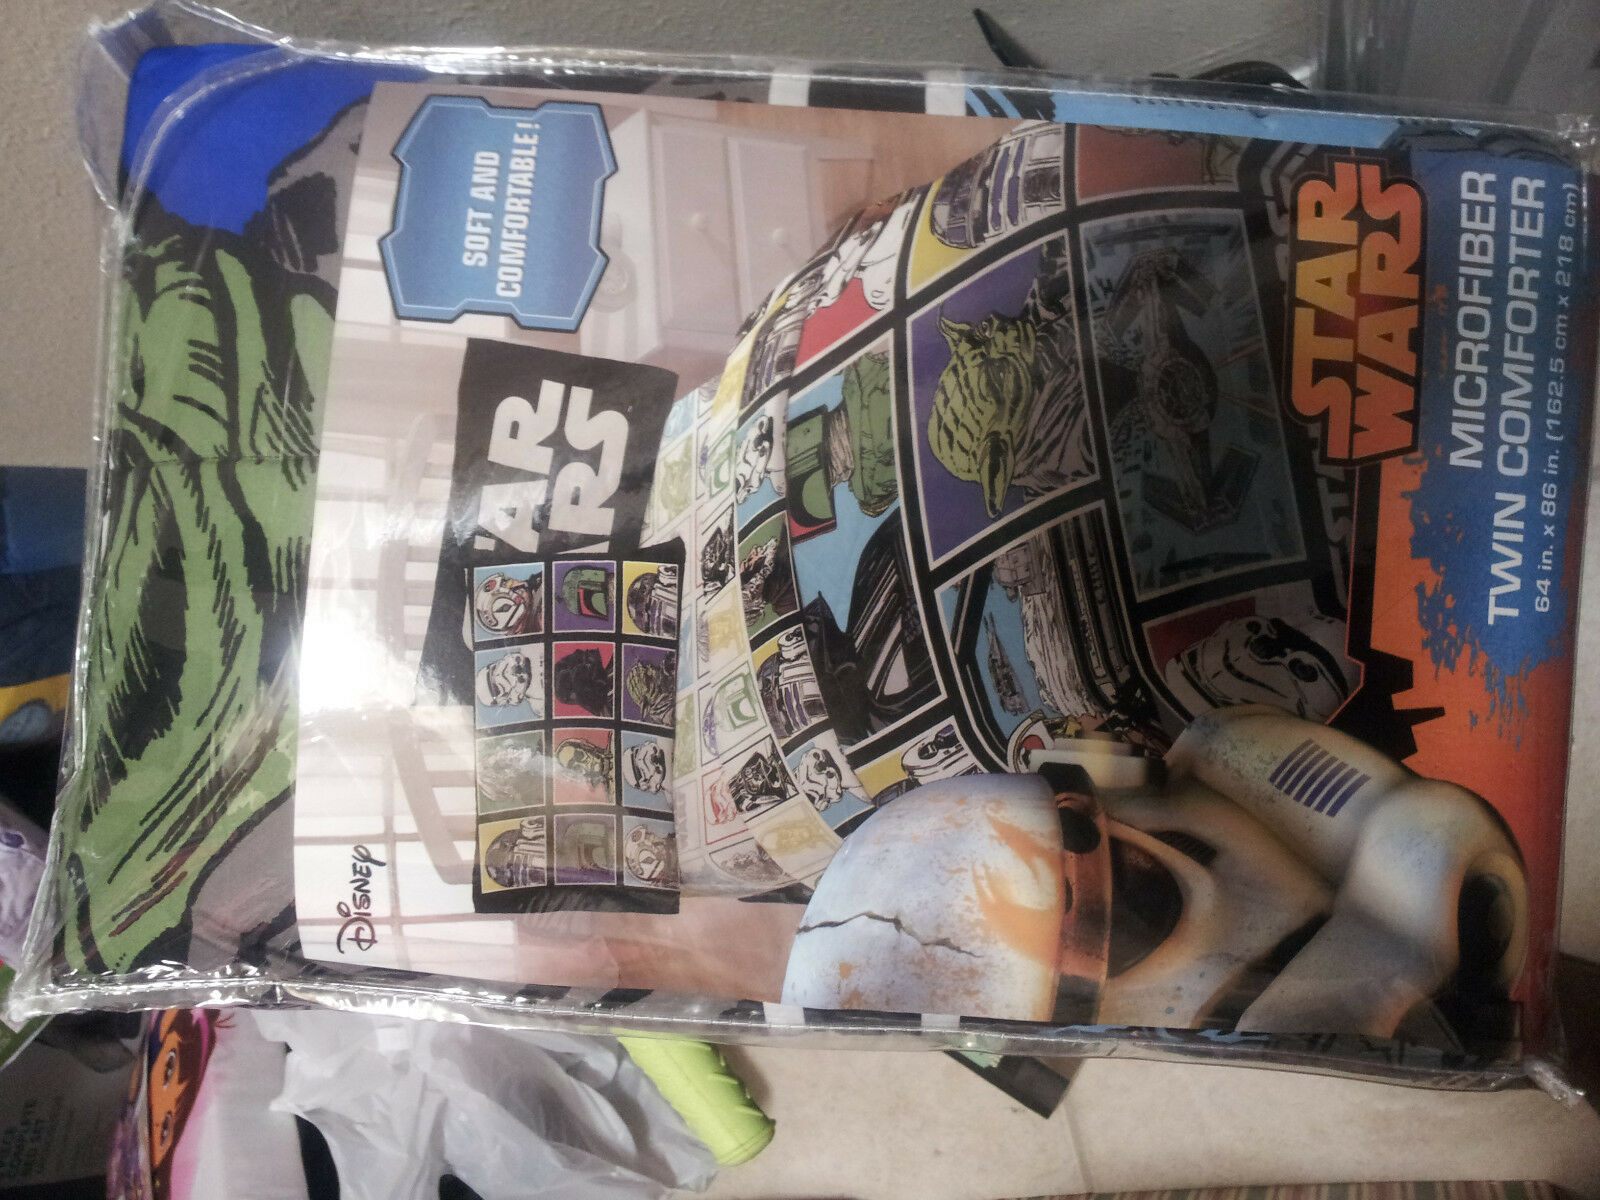 Star Wars Classic Twin/Single Size 4 Piece Comforter and Sheet Set - $66.50